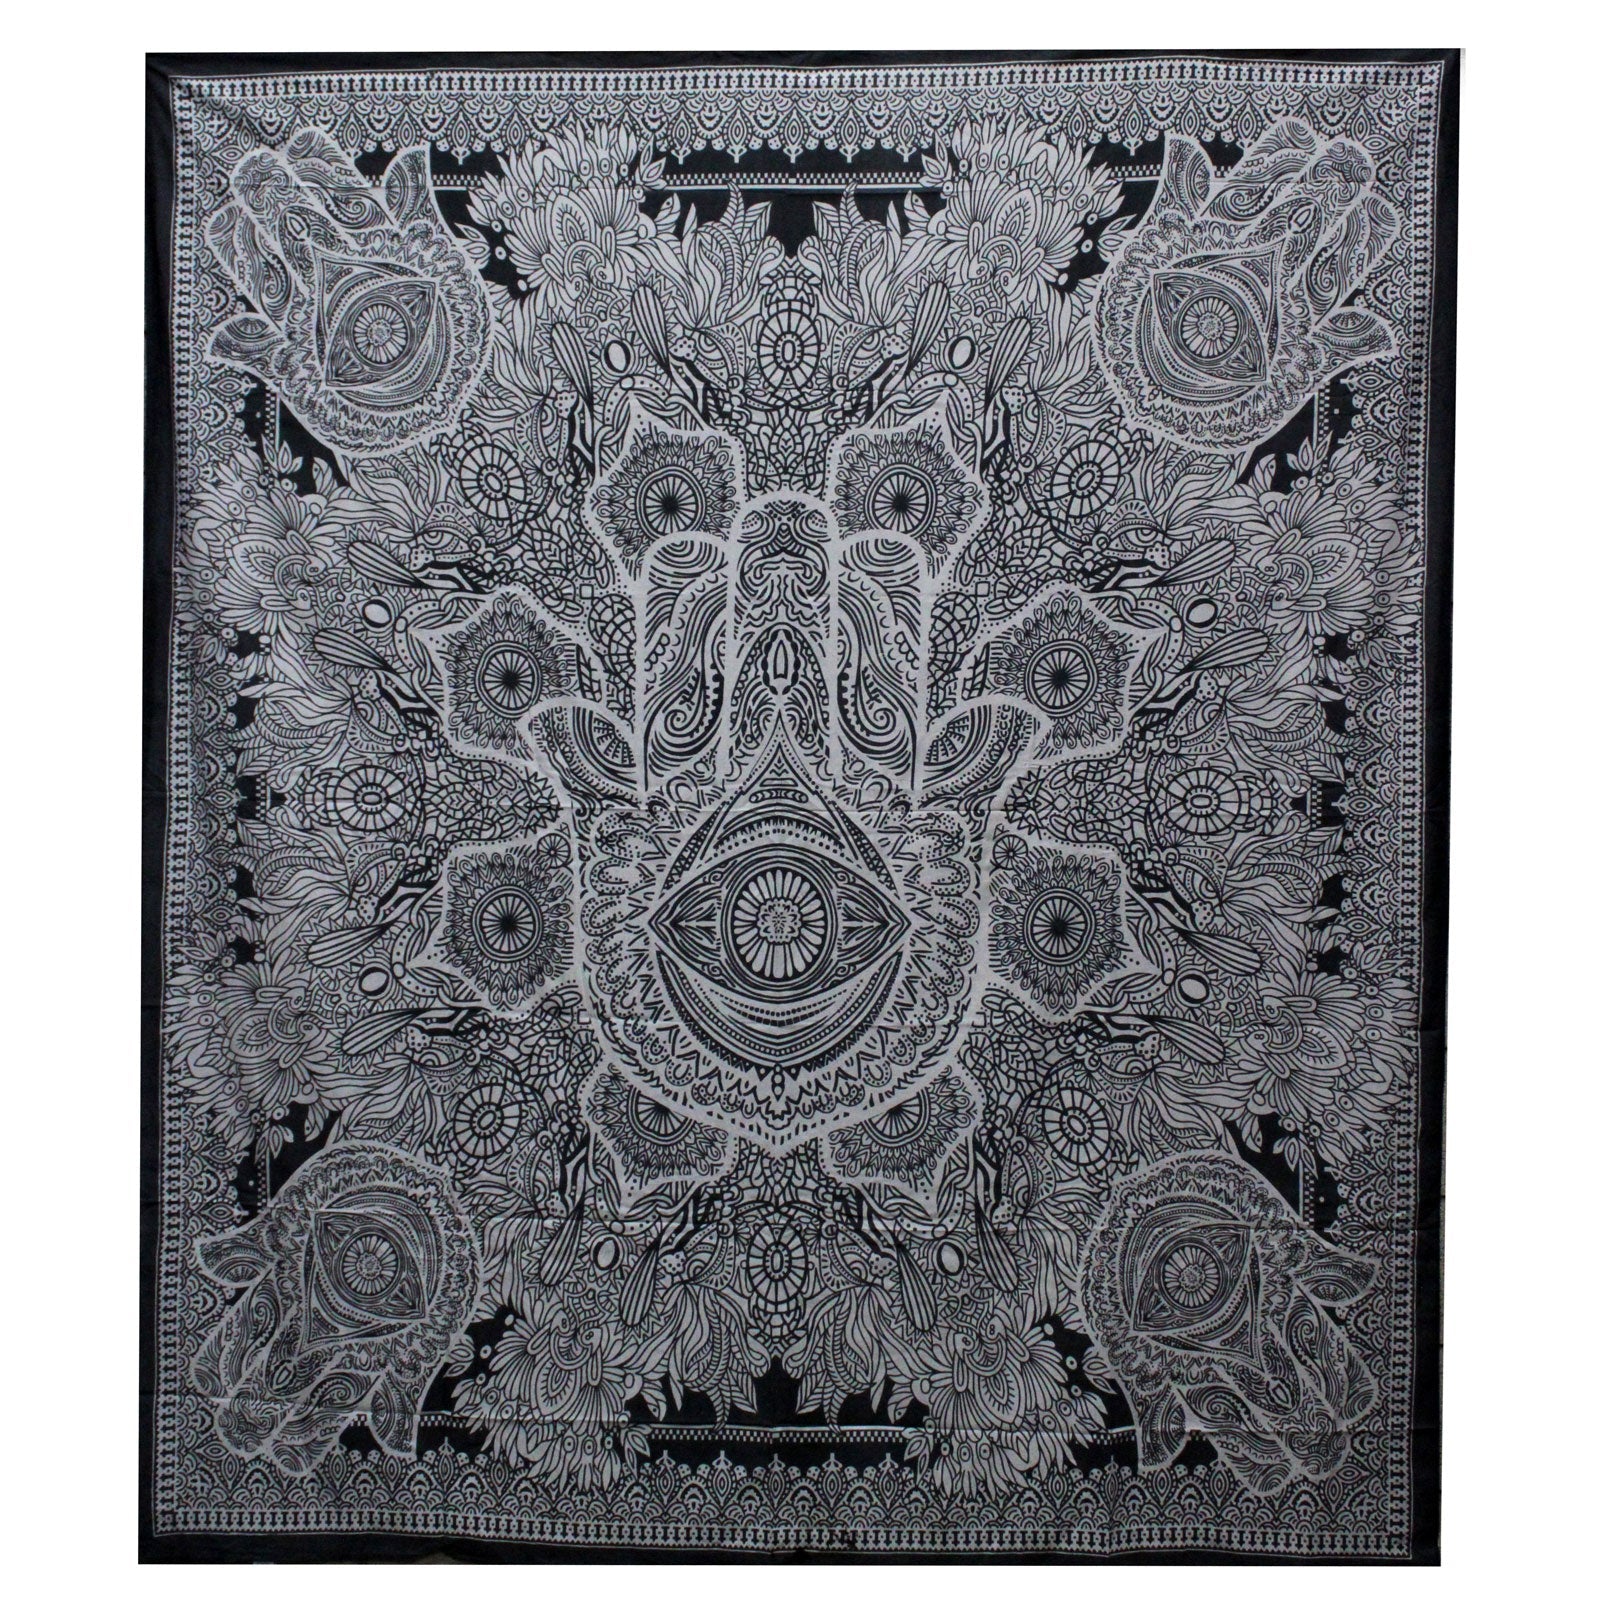 View BW Double Cotton Bedspread Wall Hanging Hamsa information